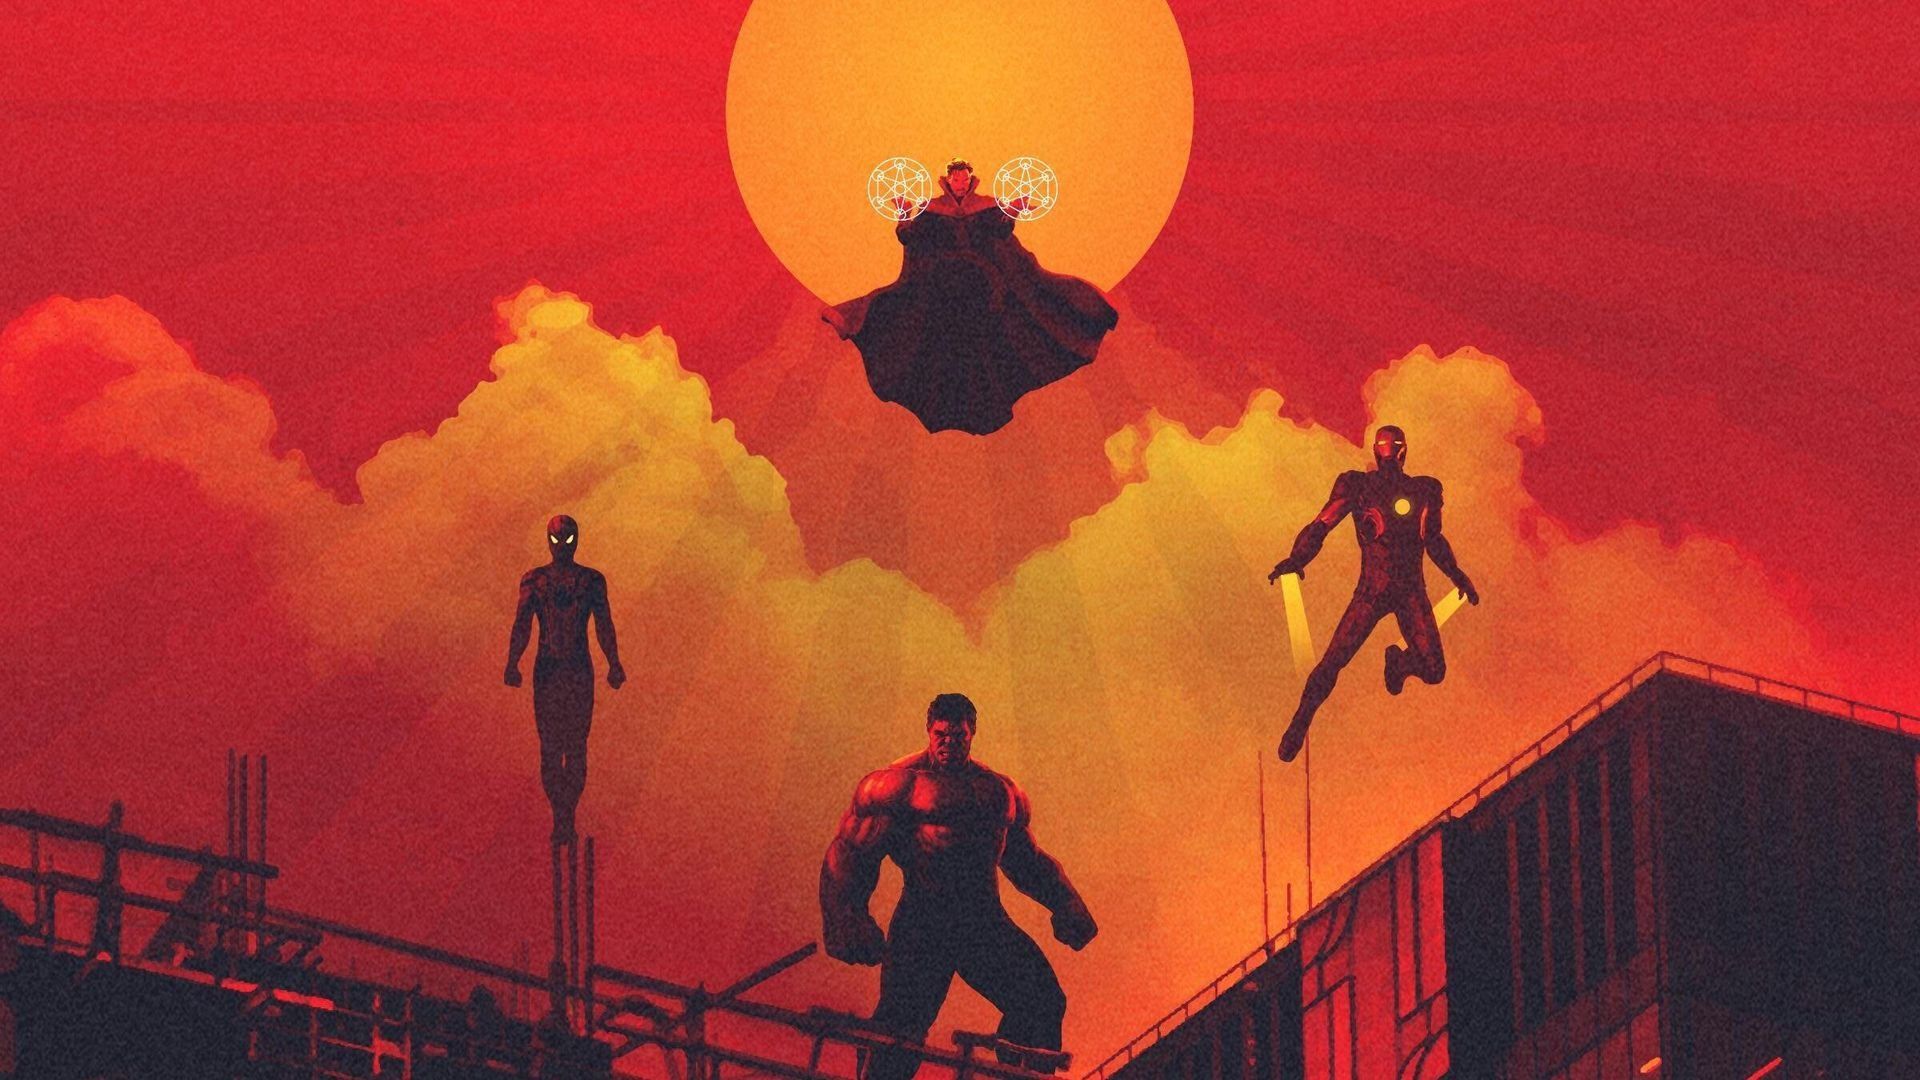 A new poster for The Eternals shows the team flying above a city - Marvel